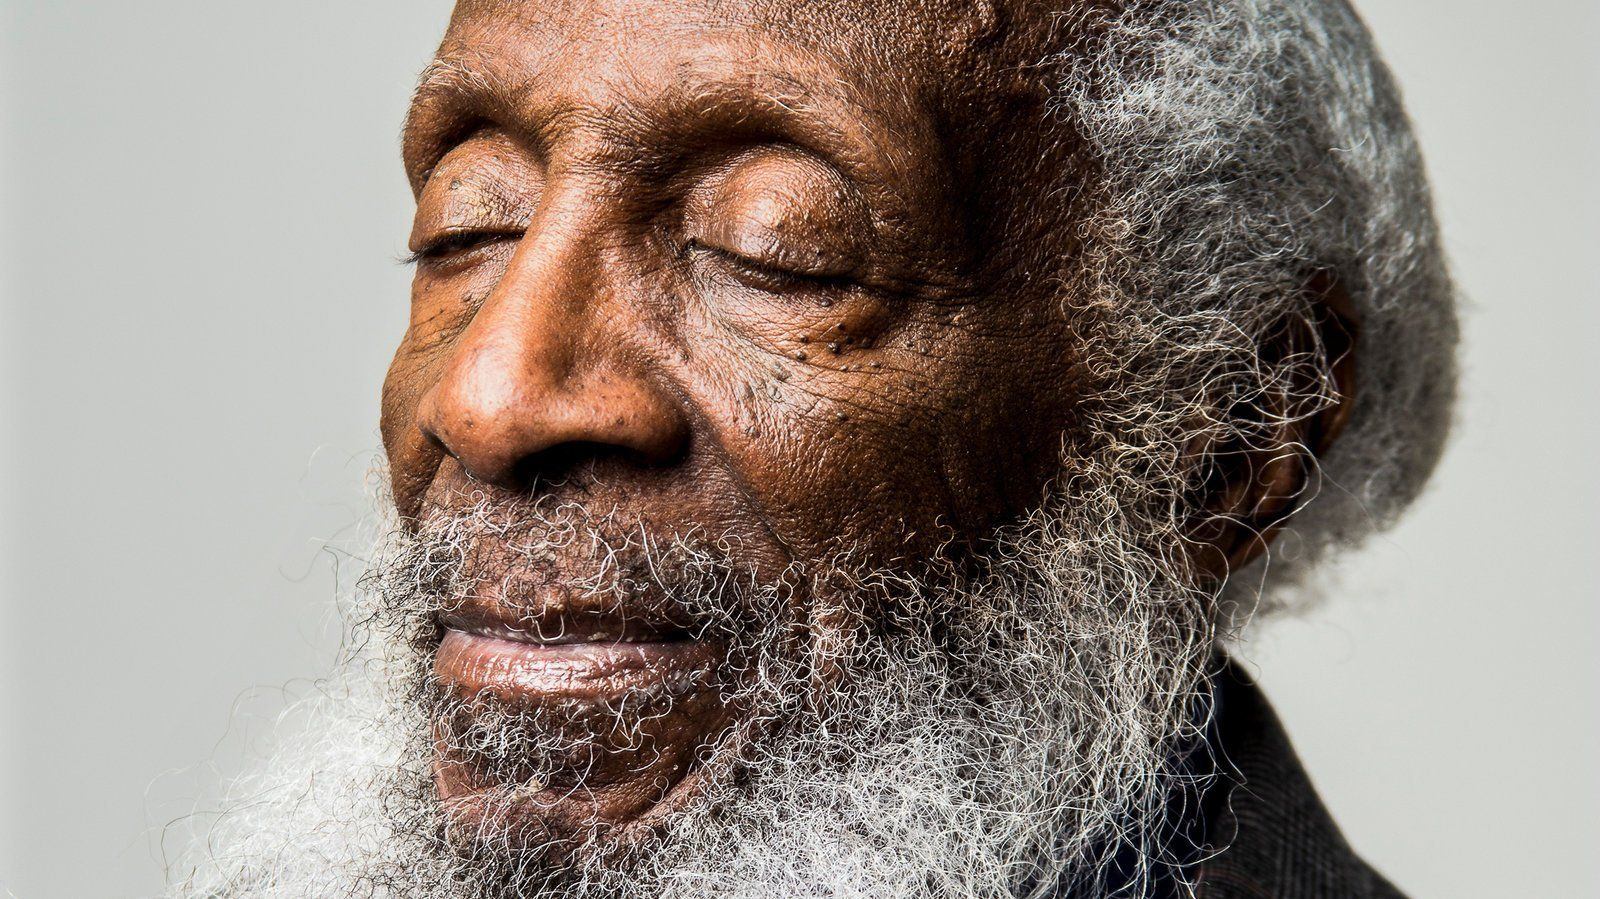 Email dick gregory